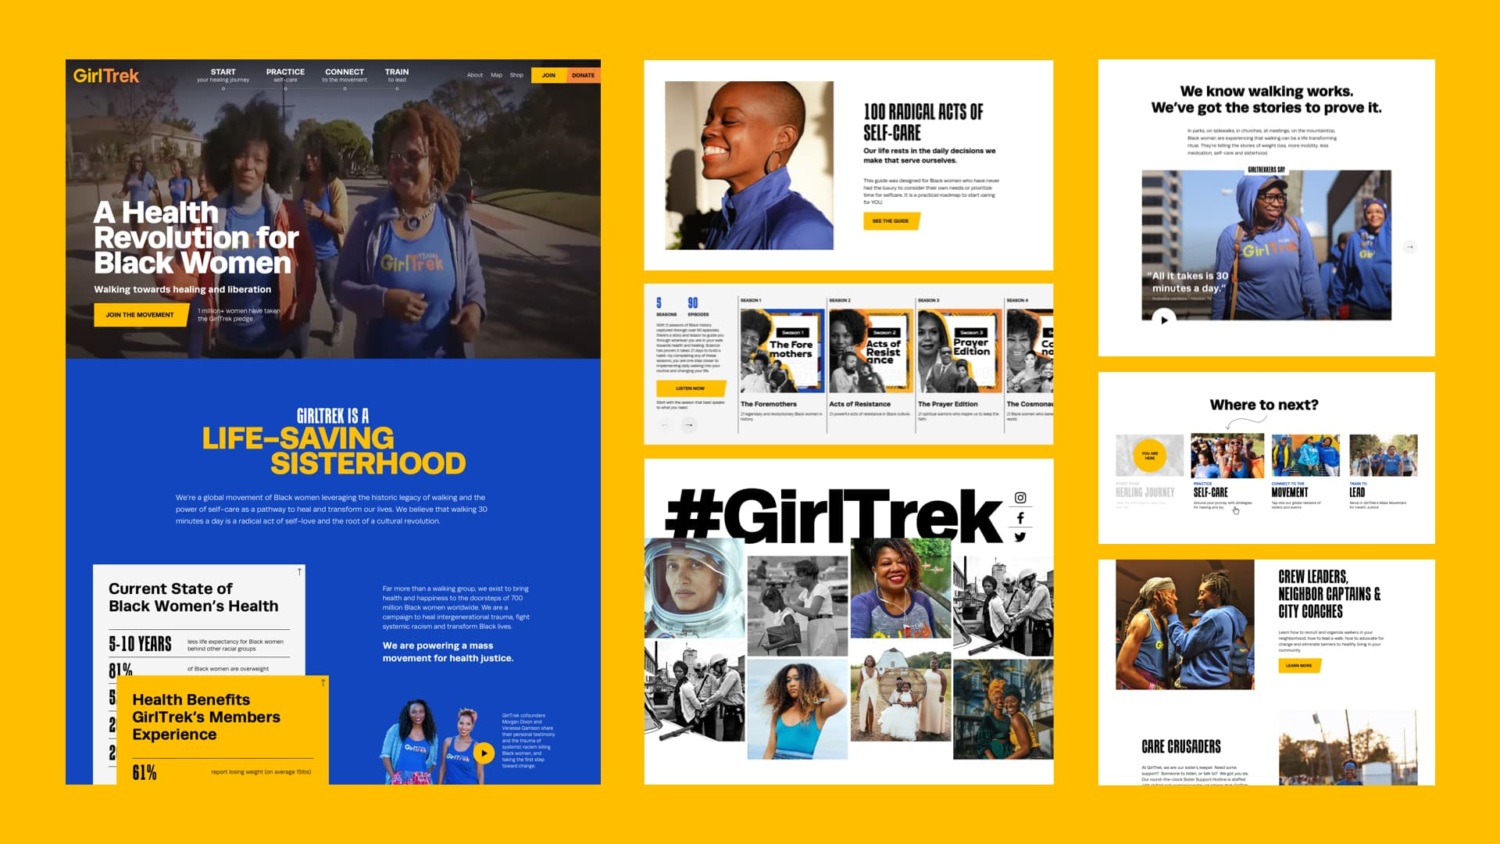 Collage of pages and sections from the redesigned Girltrek website, including the homepage